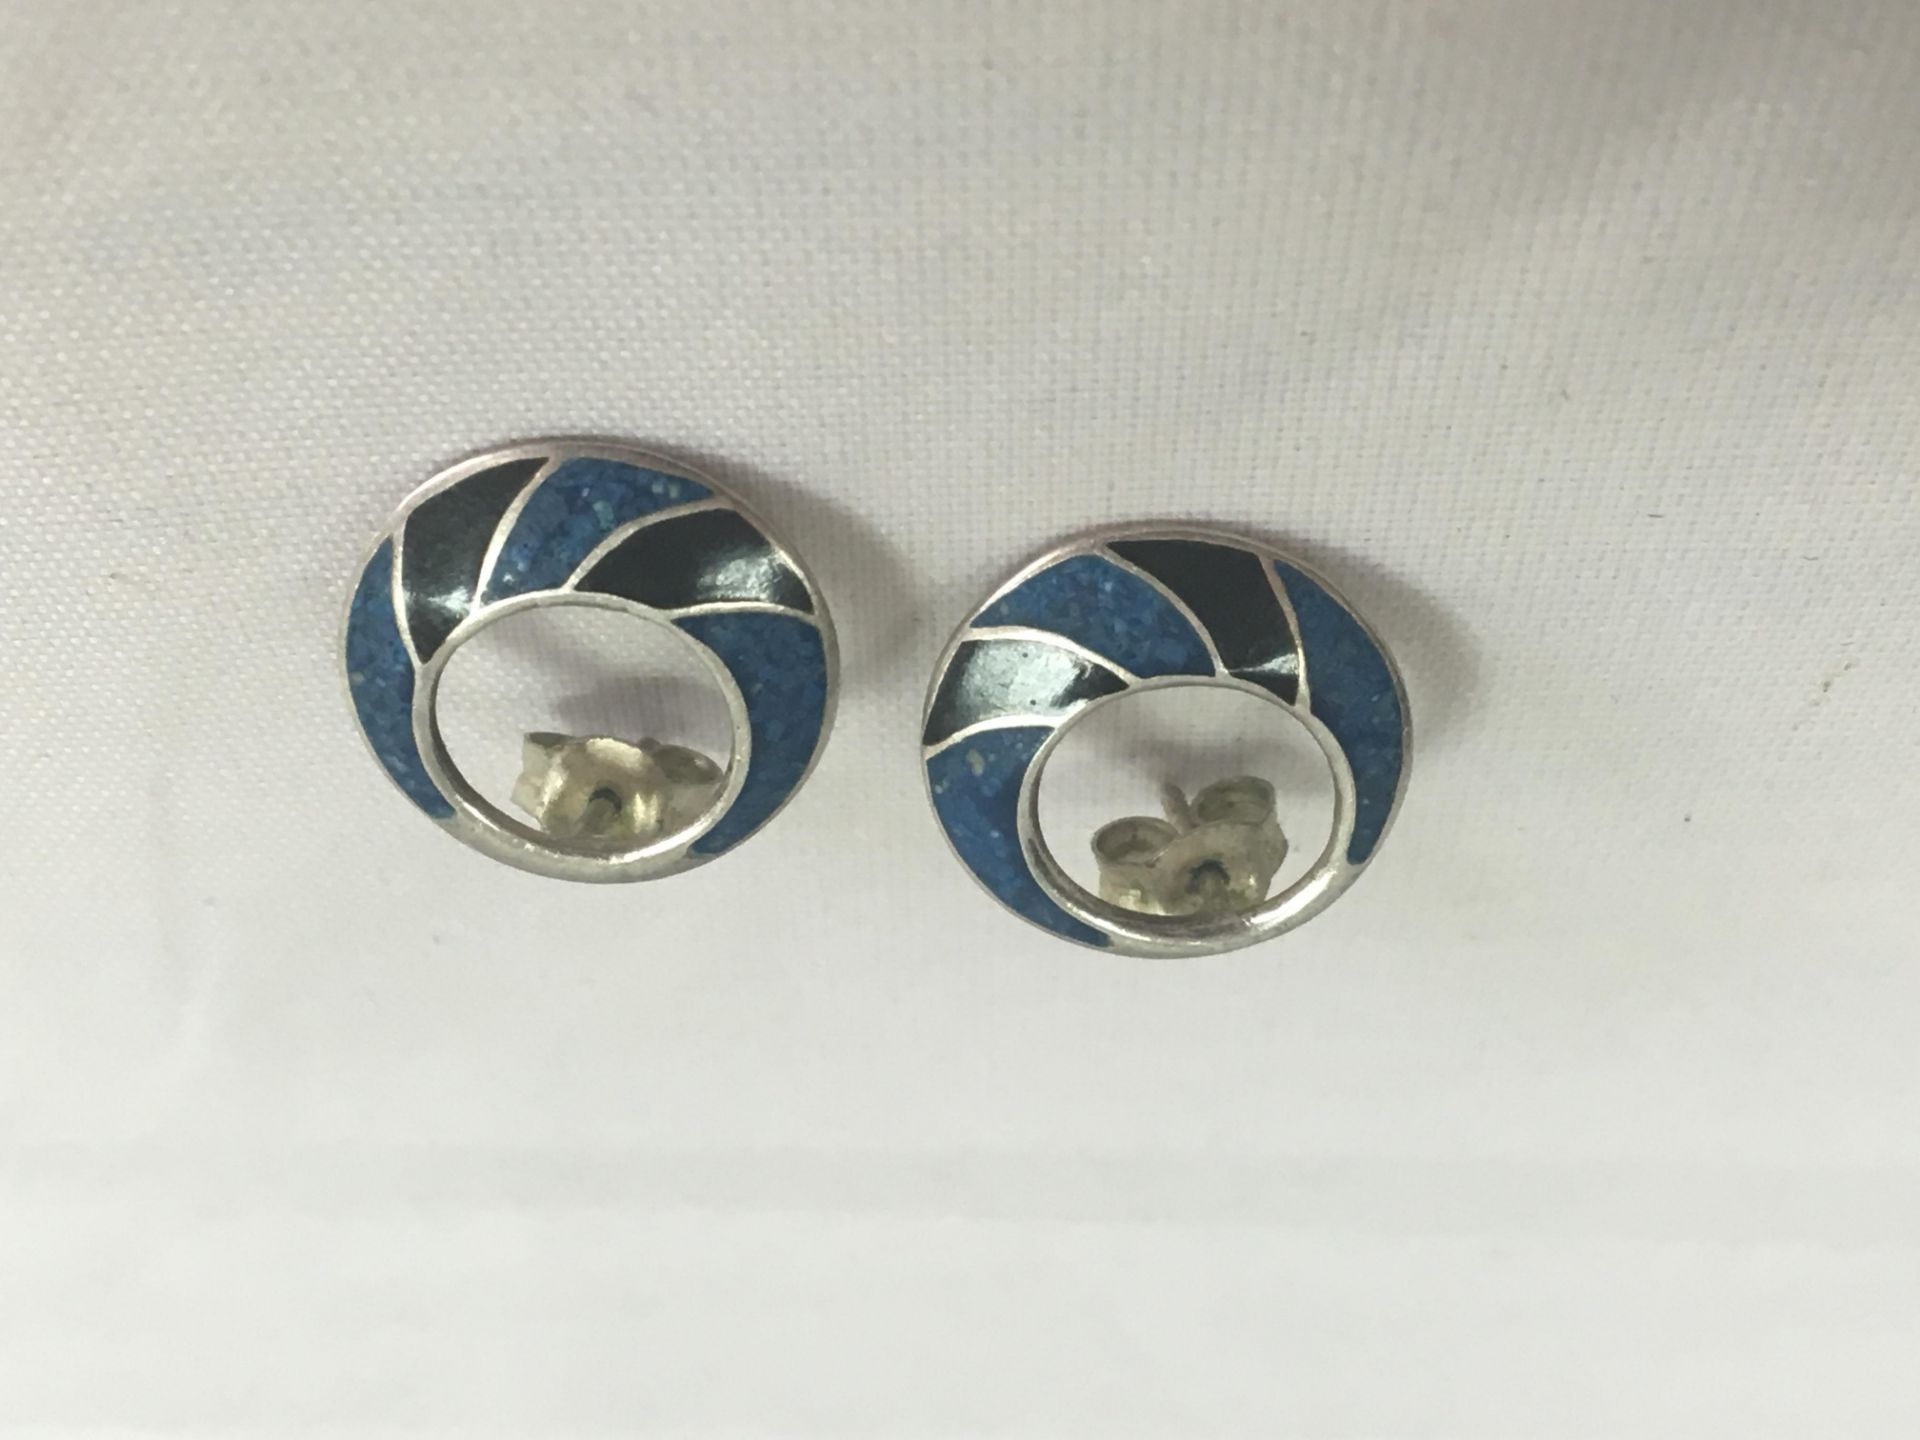 VINTAGE MEXICAN SILVER AND ENAMEL EARRINGS. FREE UK DELIVERY. NO VAT.